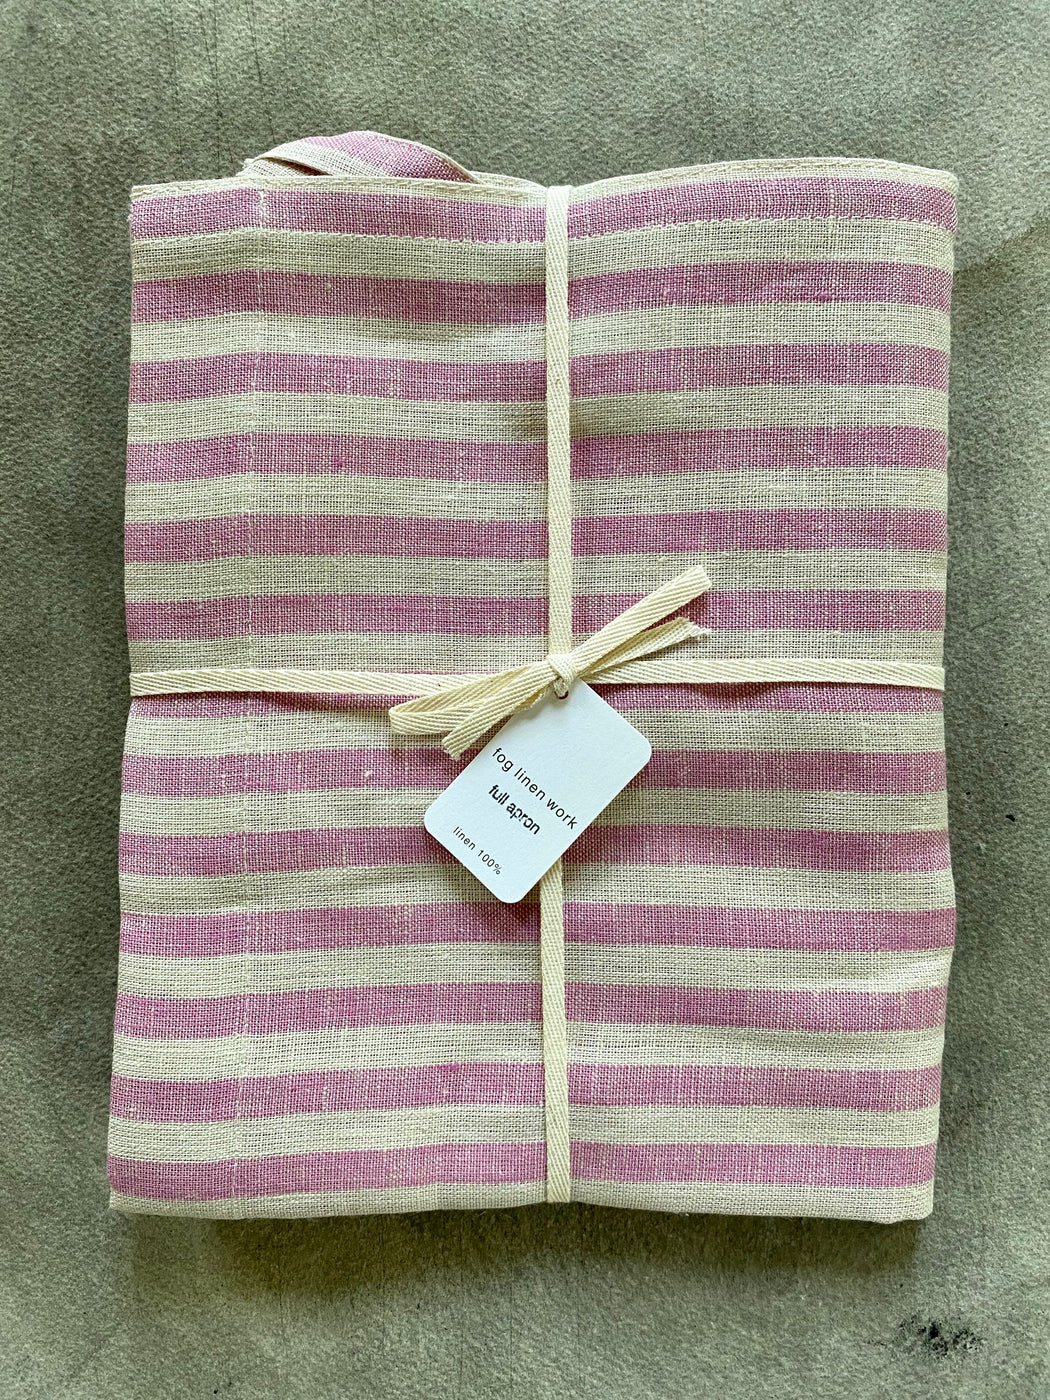 Pink Striped Apron by Fog Linen Work